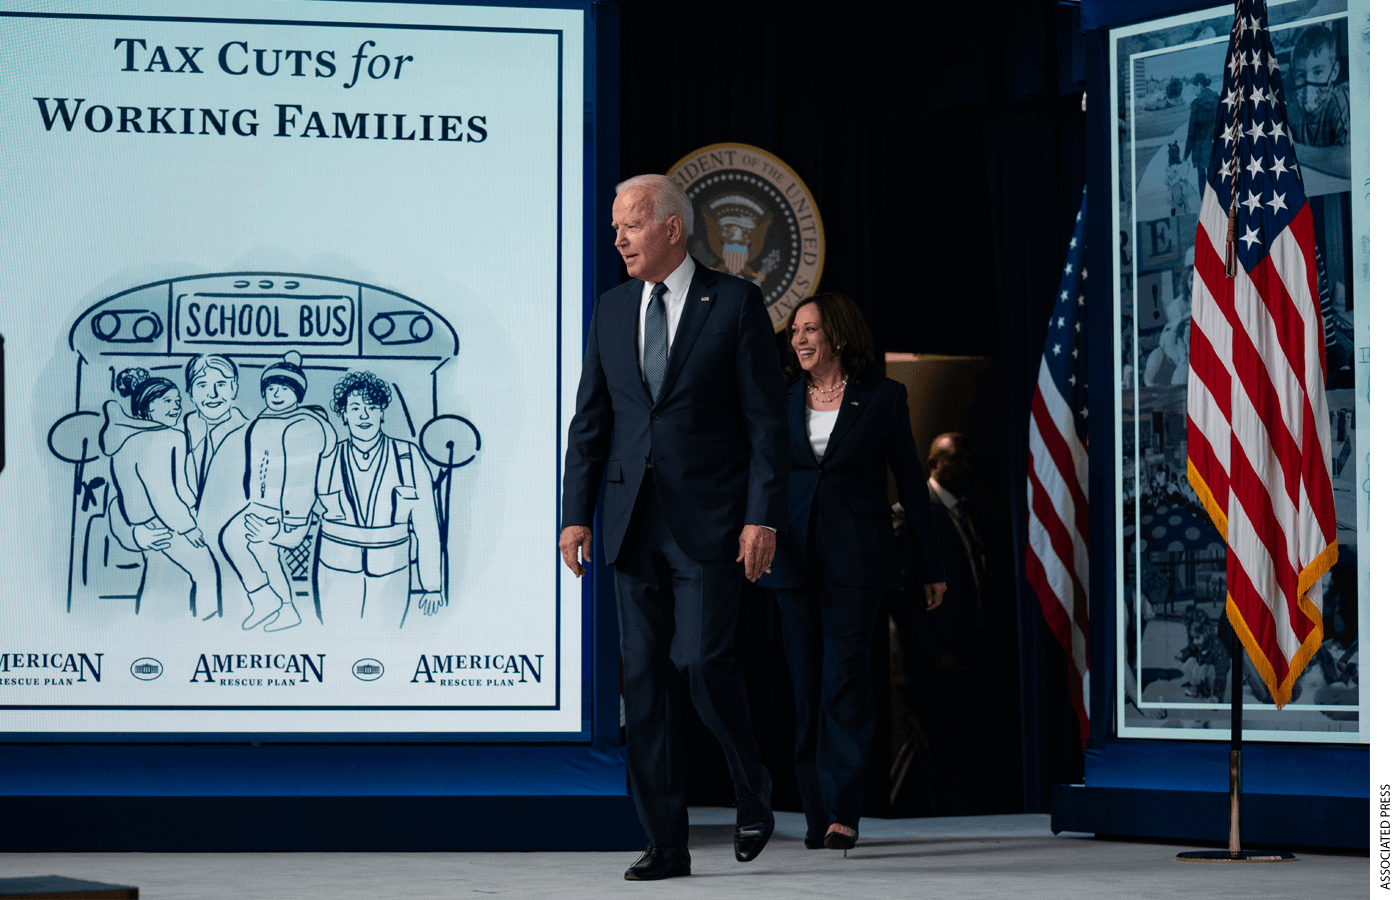 US President Joe Biden and Vice President Kamala Harris arrive for an event to mark the start of monthly Child Tax Credit relief payments, in the White House complex, July 15, 2021.